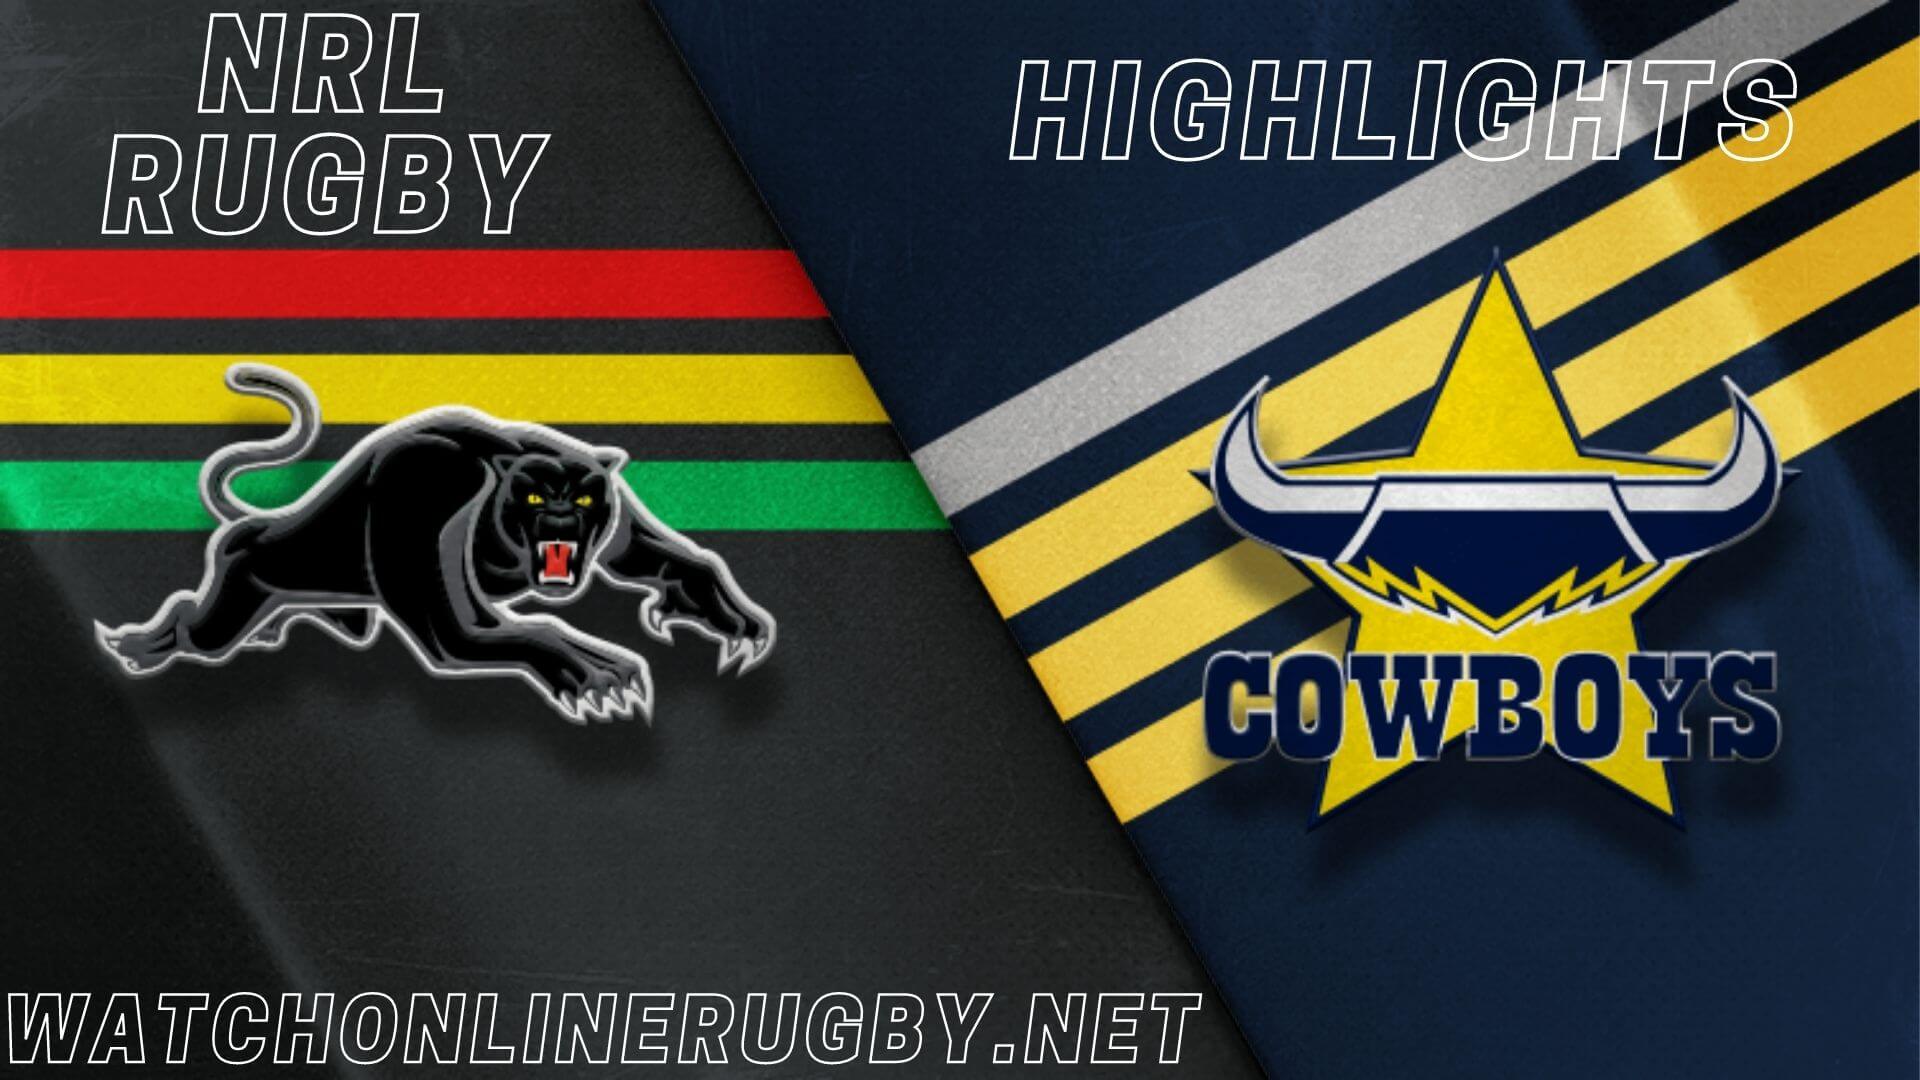 Panthers Vs Cowboys Highlights RD 12 NRL Rugby